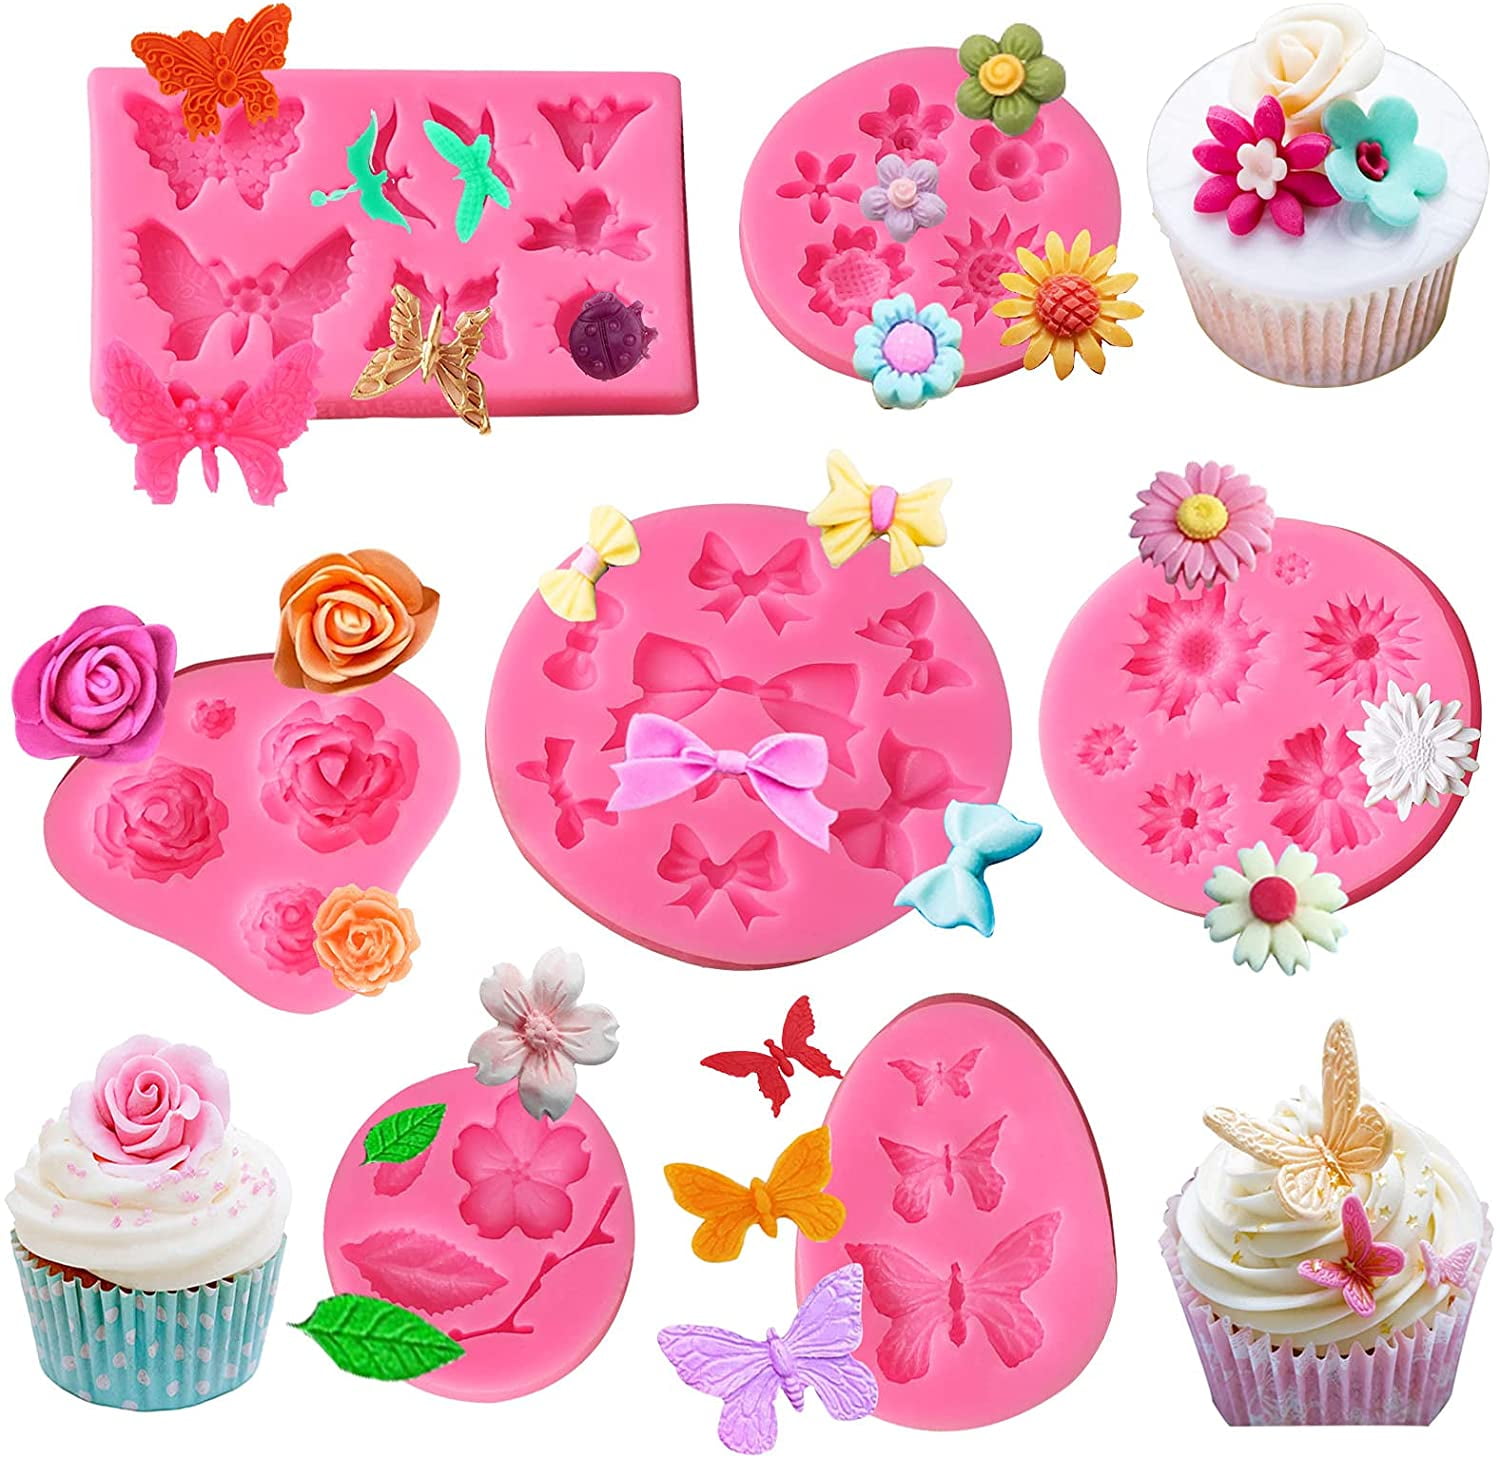 1pc Rose Design Candy Mold Rose Mold Silicone Jelly Soap 3D Fondant Molds  for Cupcake Candy Chocolate Decoration Cupcake Molds for Baking